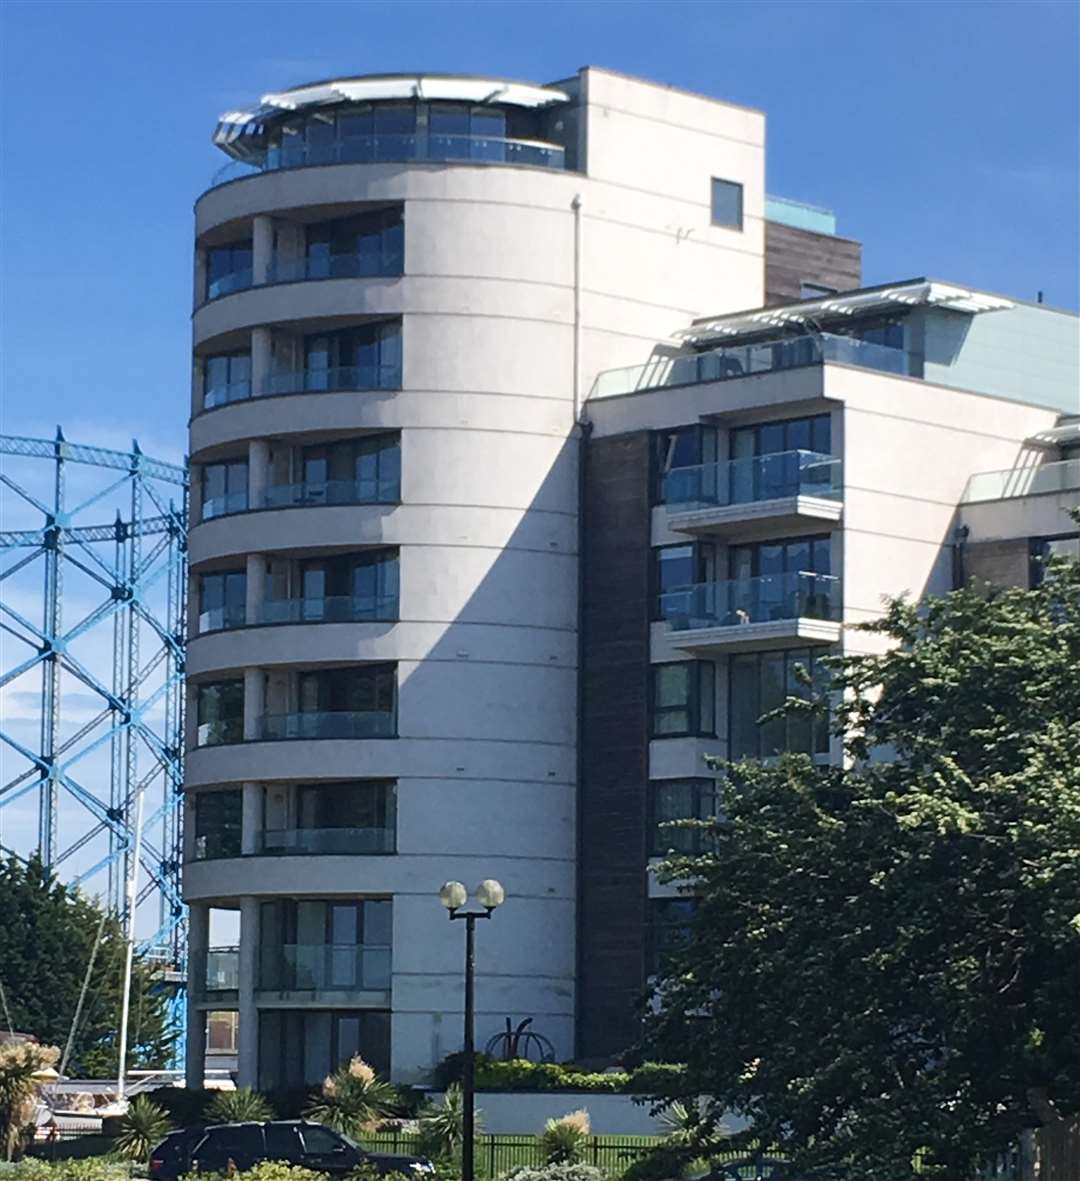 Medway Council has served an improvement notice on the building's owners